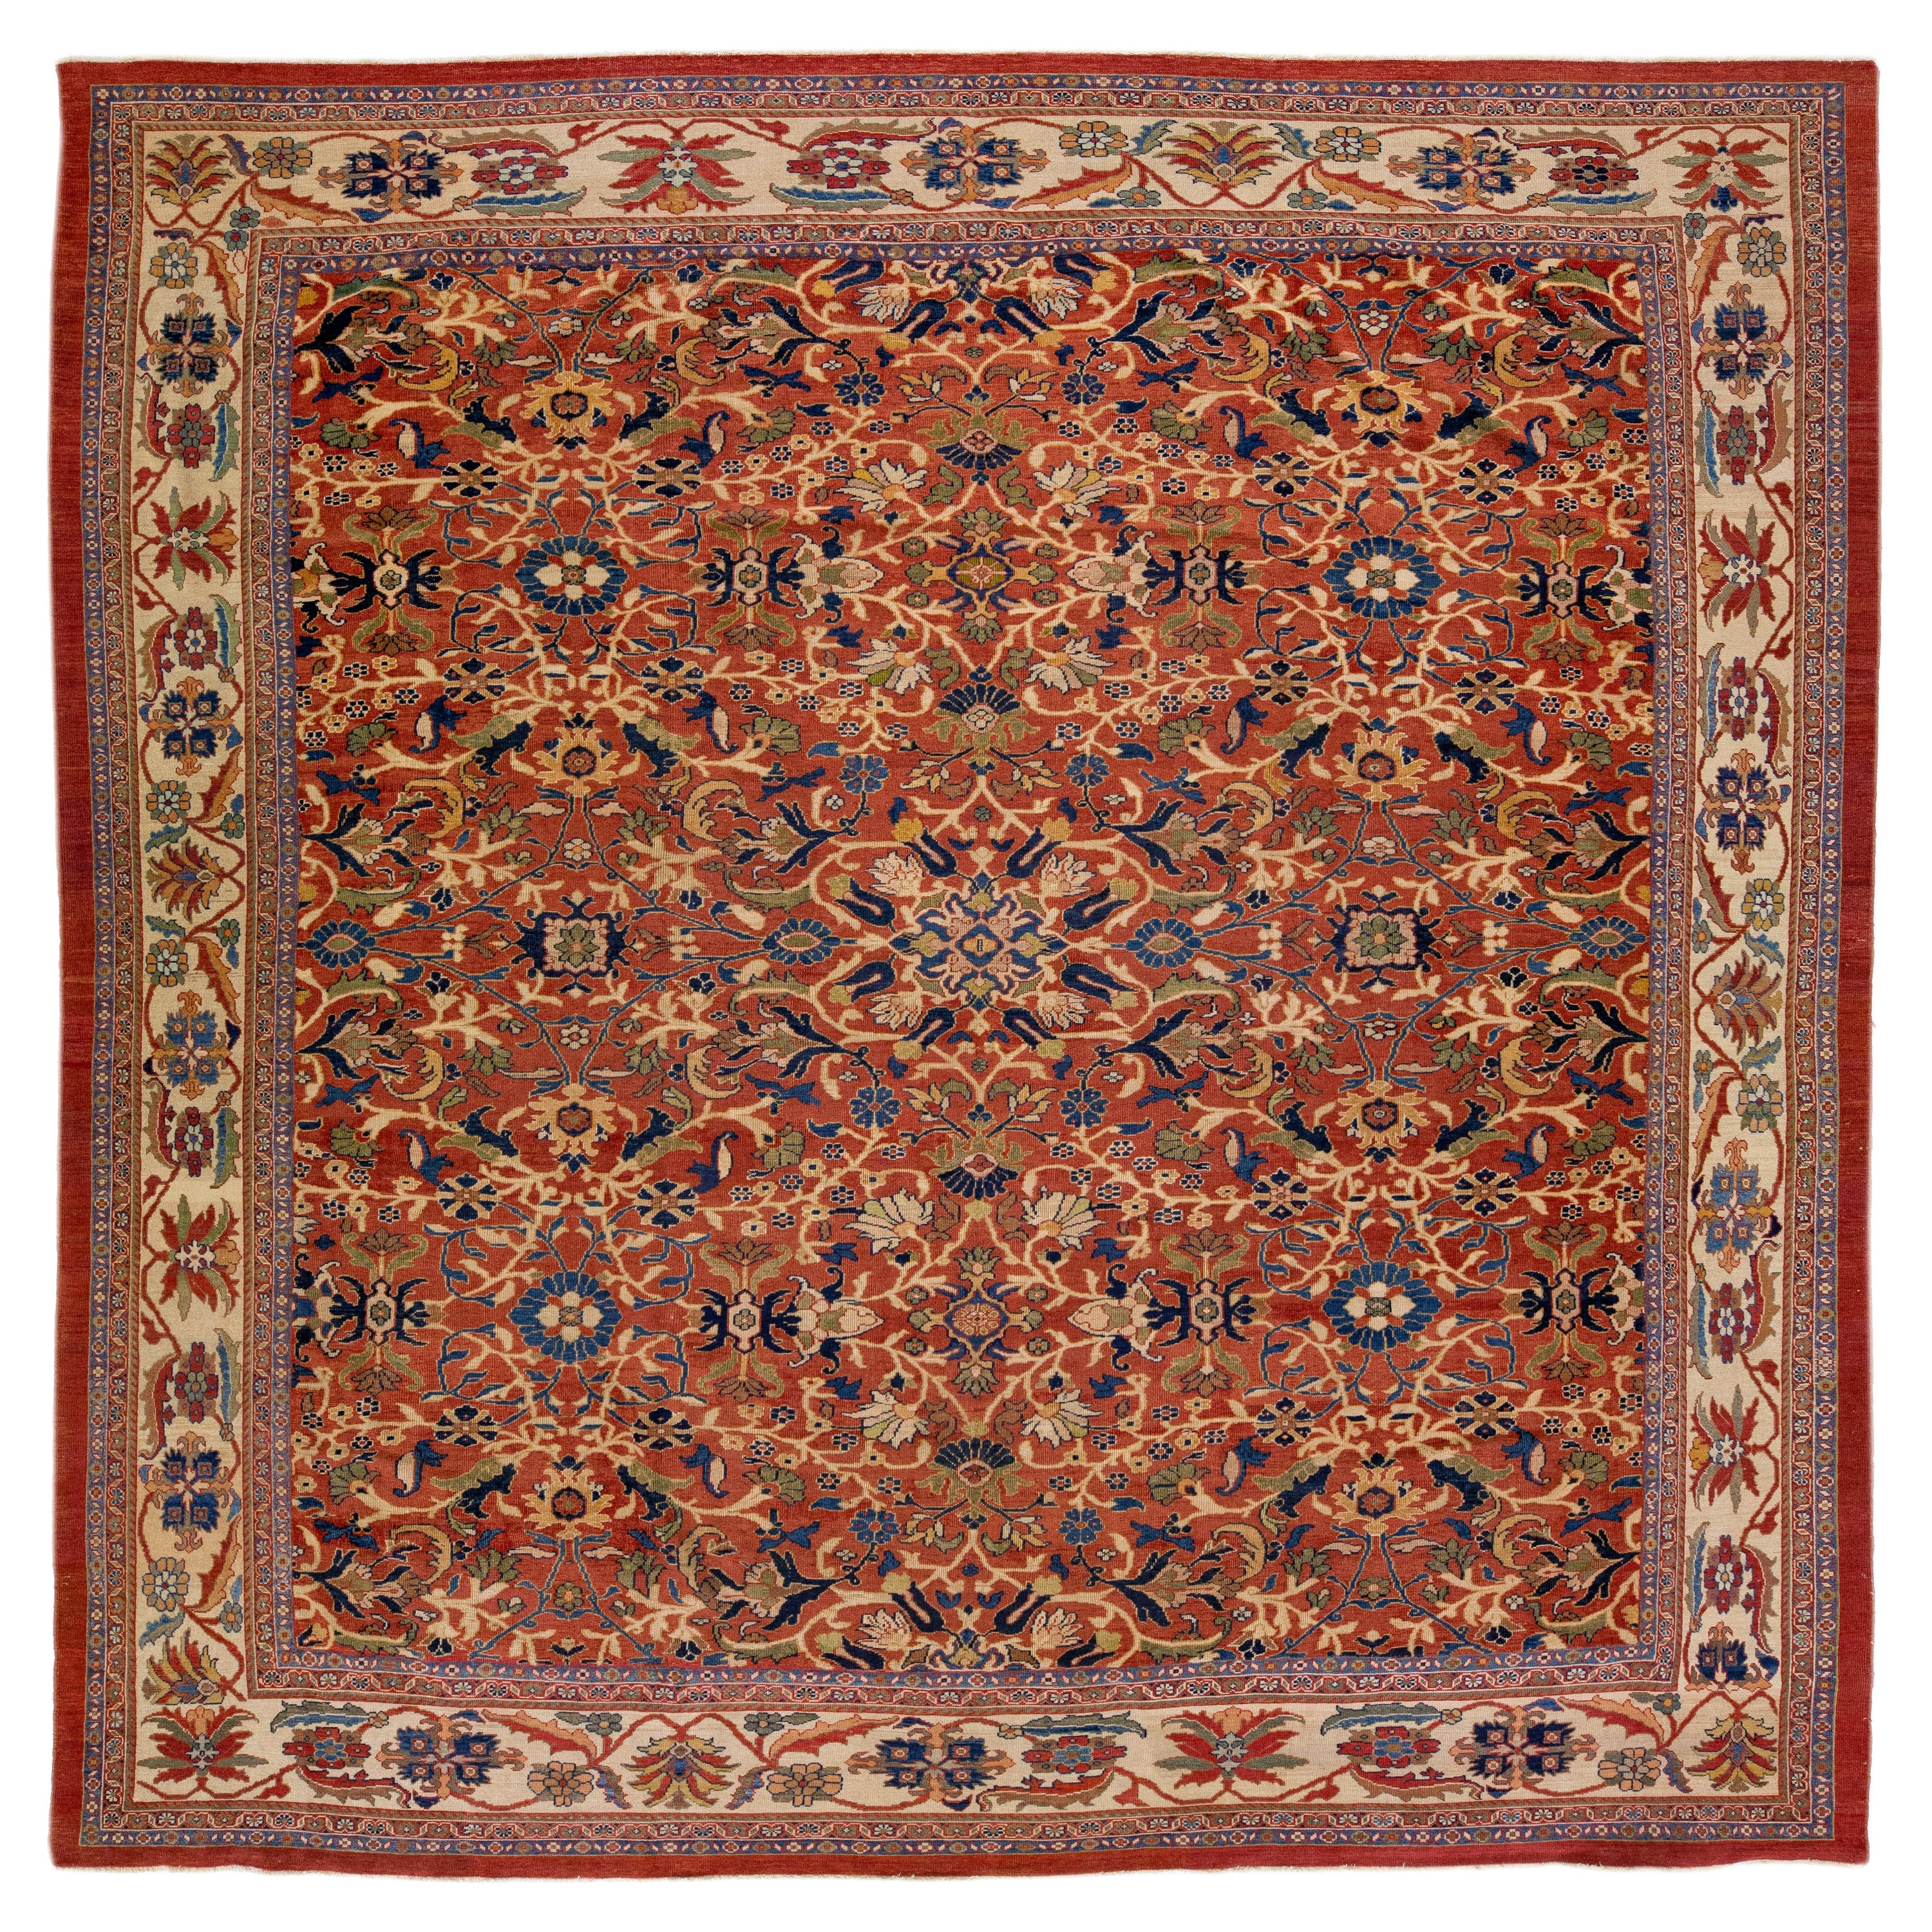  19th Century Antique Sultanabad Handmade Allover Floral Rust Square Wool Rug